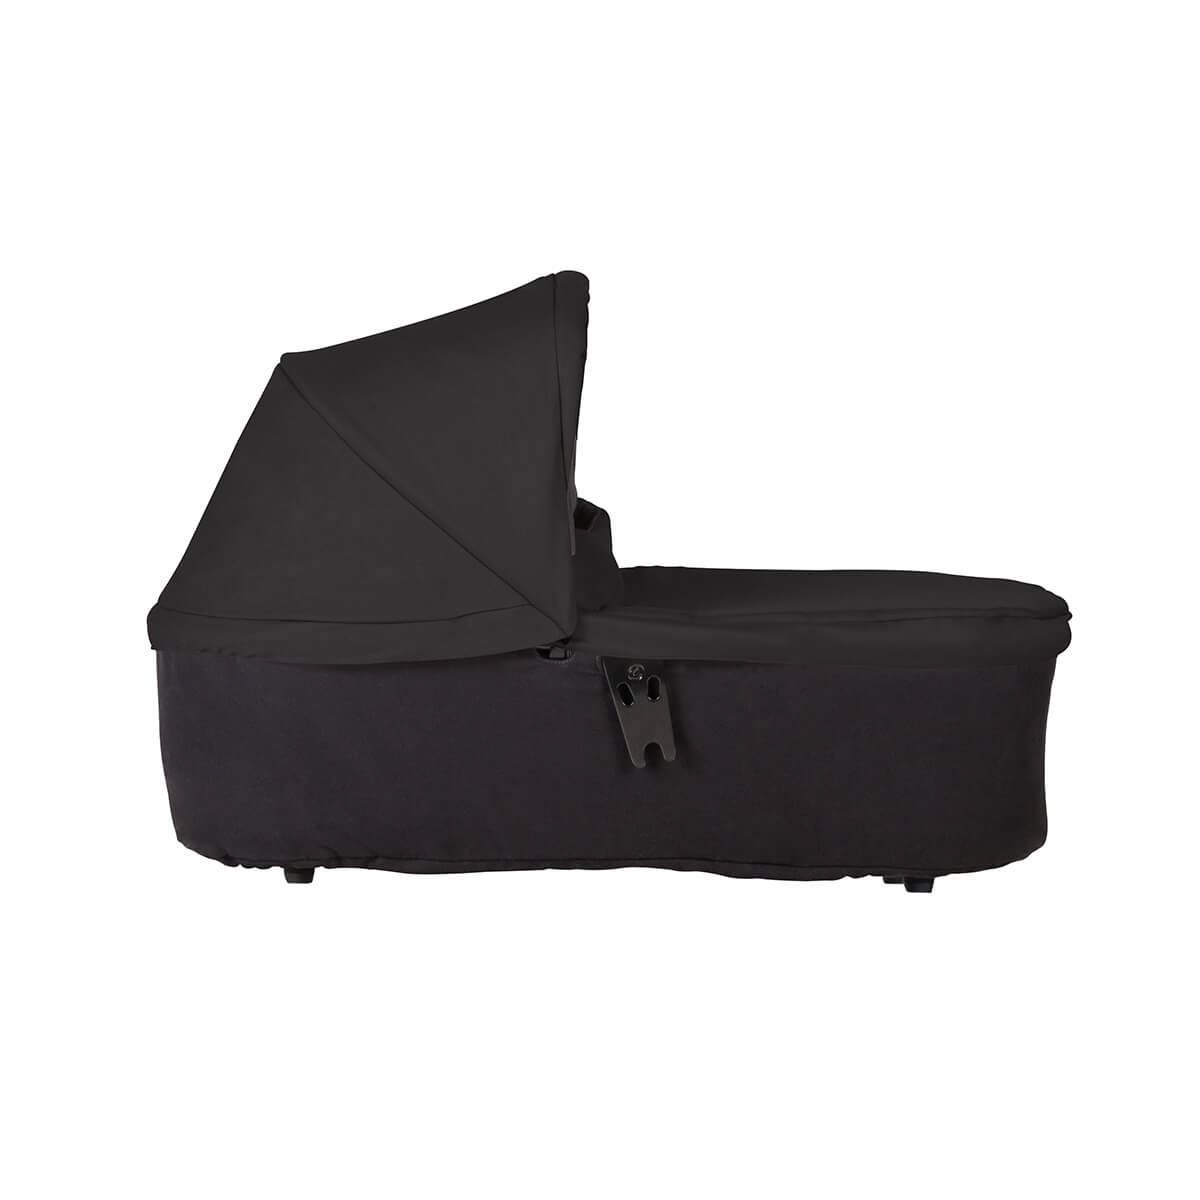 mountain buggy duet carrycot plus in lie flat mode side view shown in color black_black